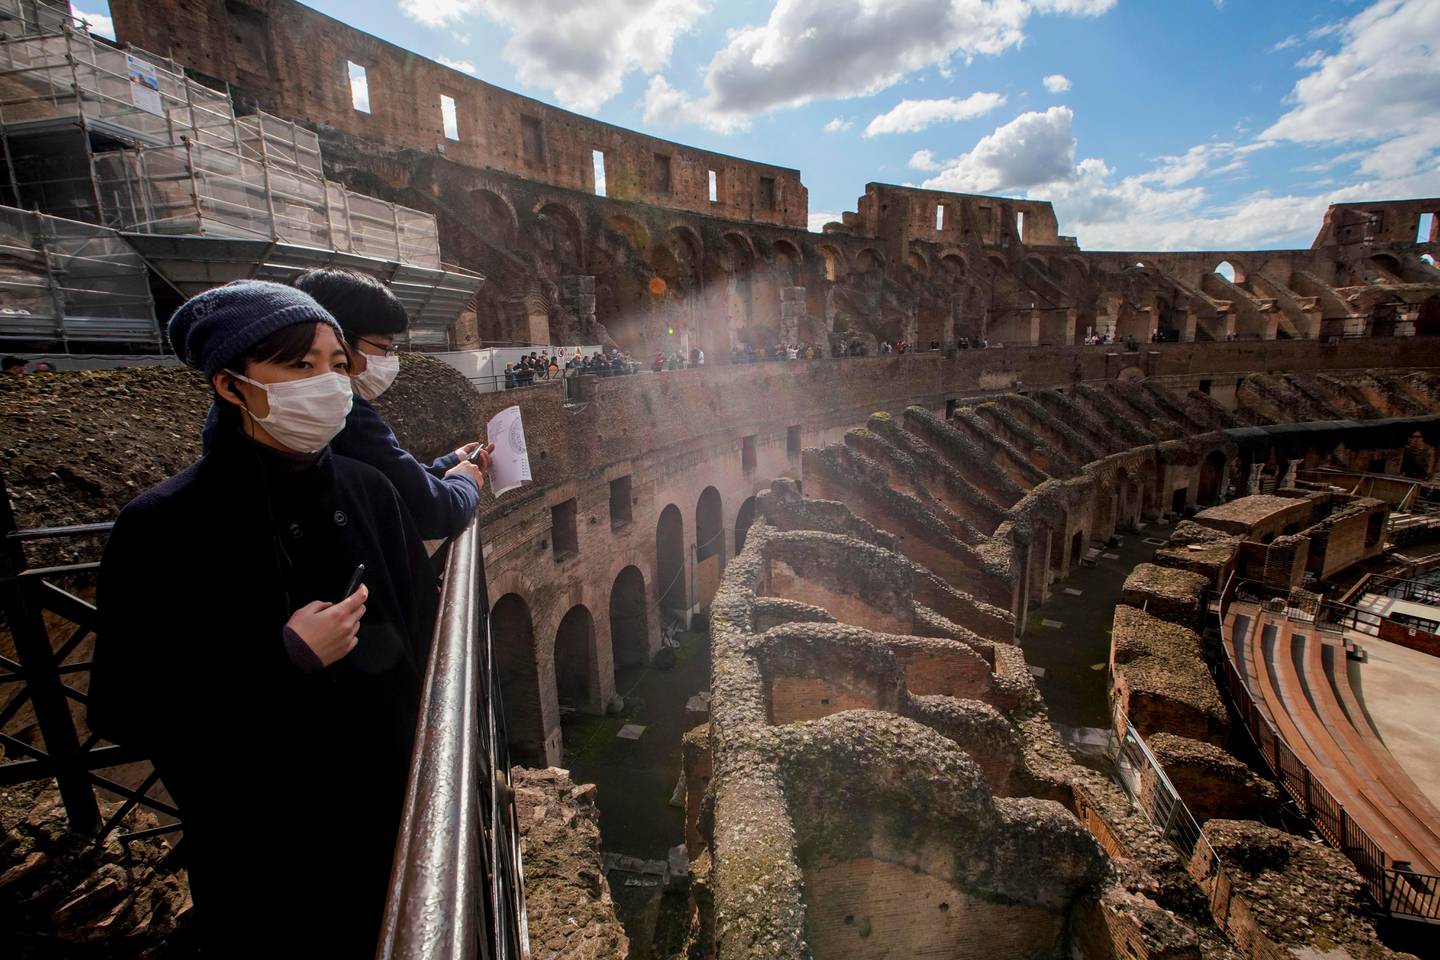 Tourists visit the Colosseum, in Rome, Saturday, March 7, 2020. With the coronavirus emergency deepening in Europe, Italy, a focal point in the contagion, risks falling back into recession as foreign tourists are spooked from visiting its cultural treasures and the global market shrinks for prized artisanal products, from fashion to design. (AP Photo/Andrew Medichini)